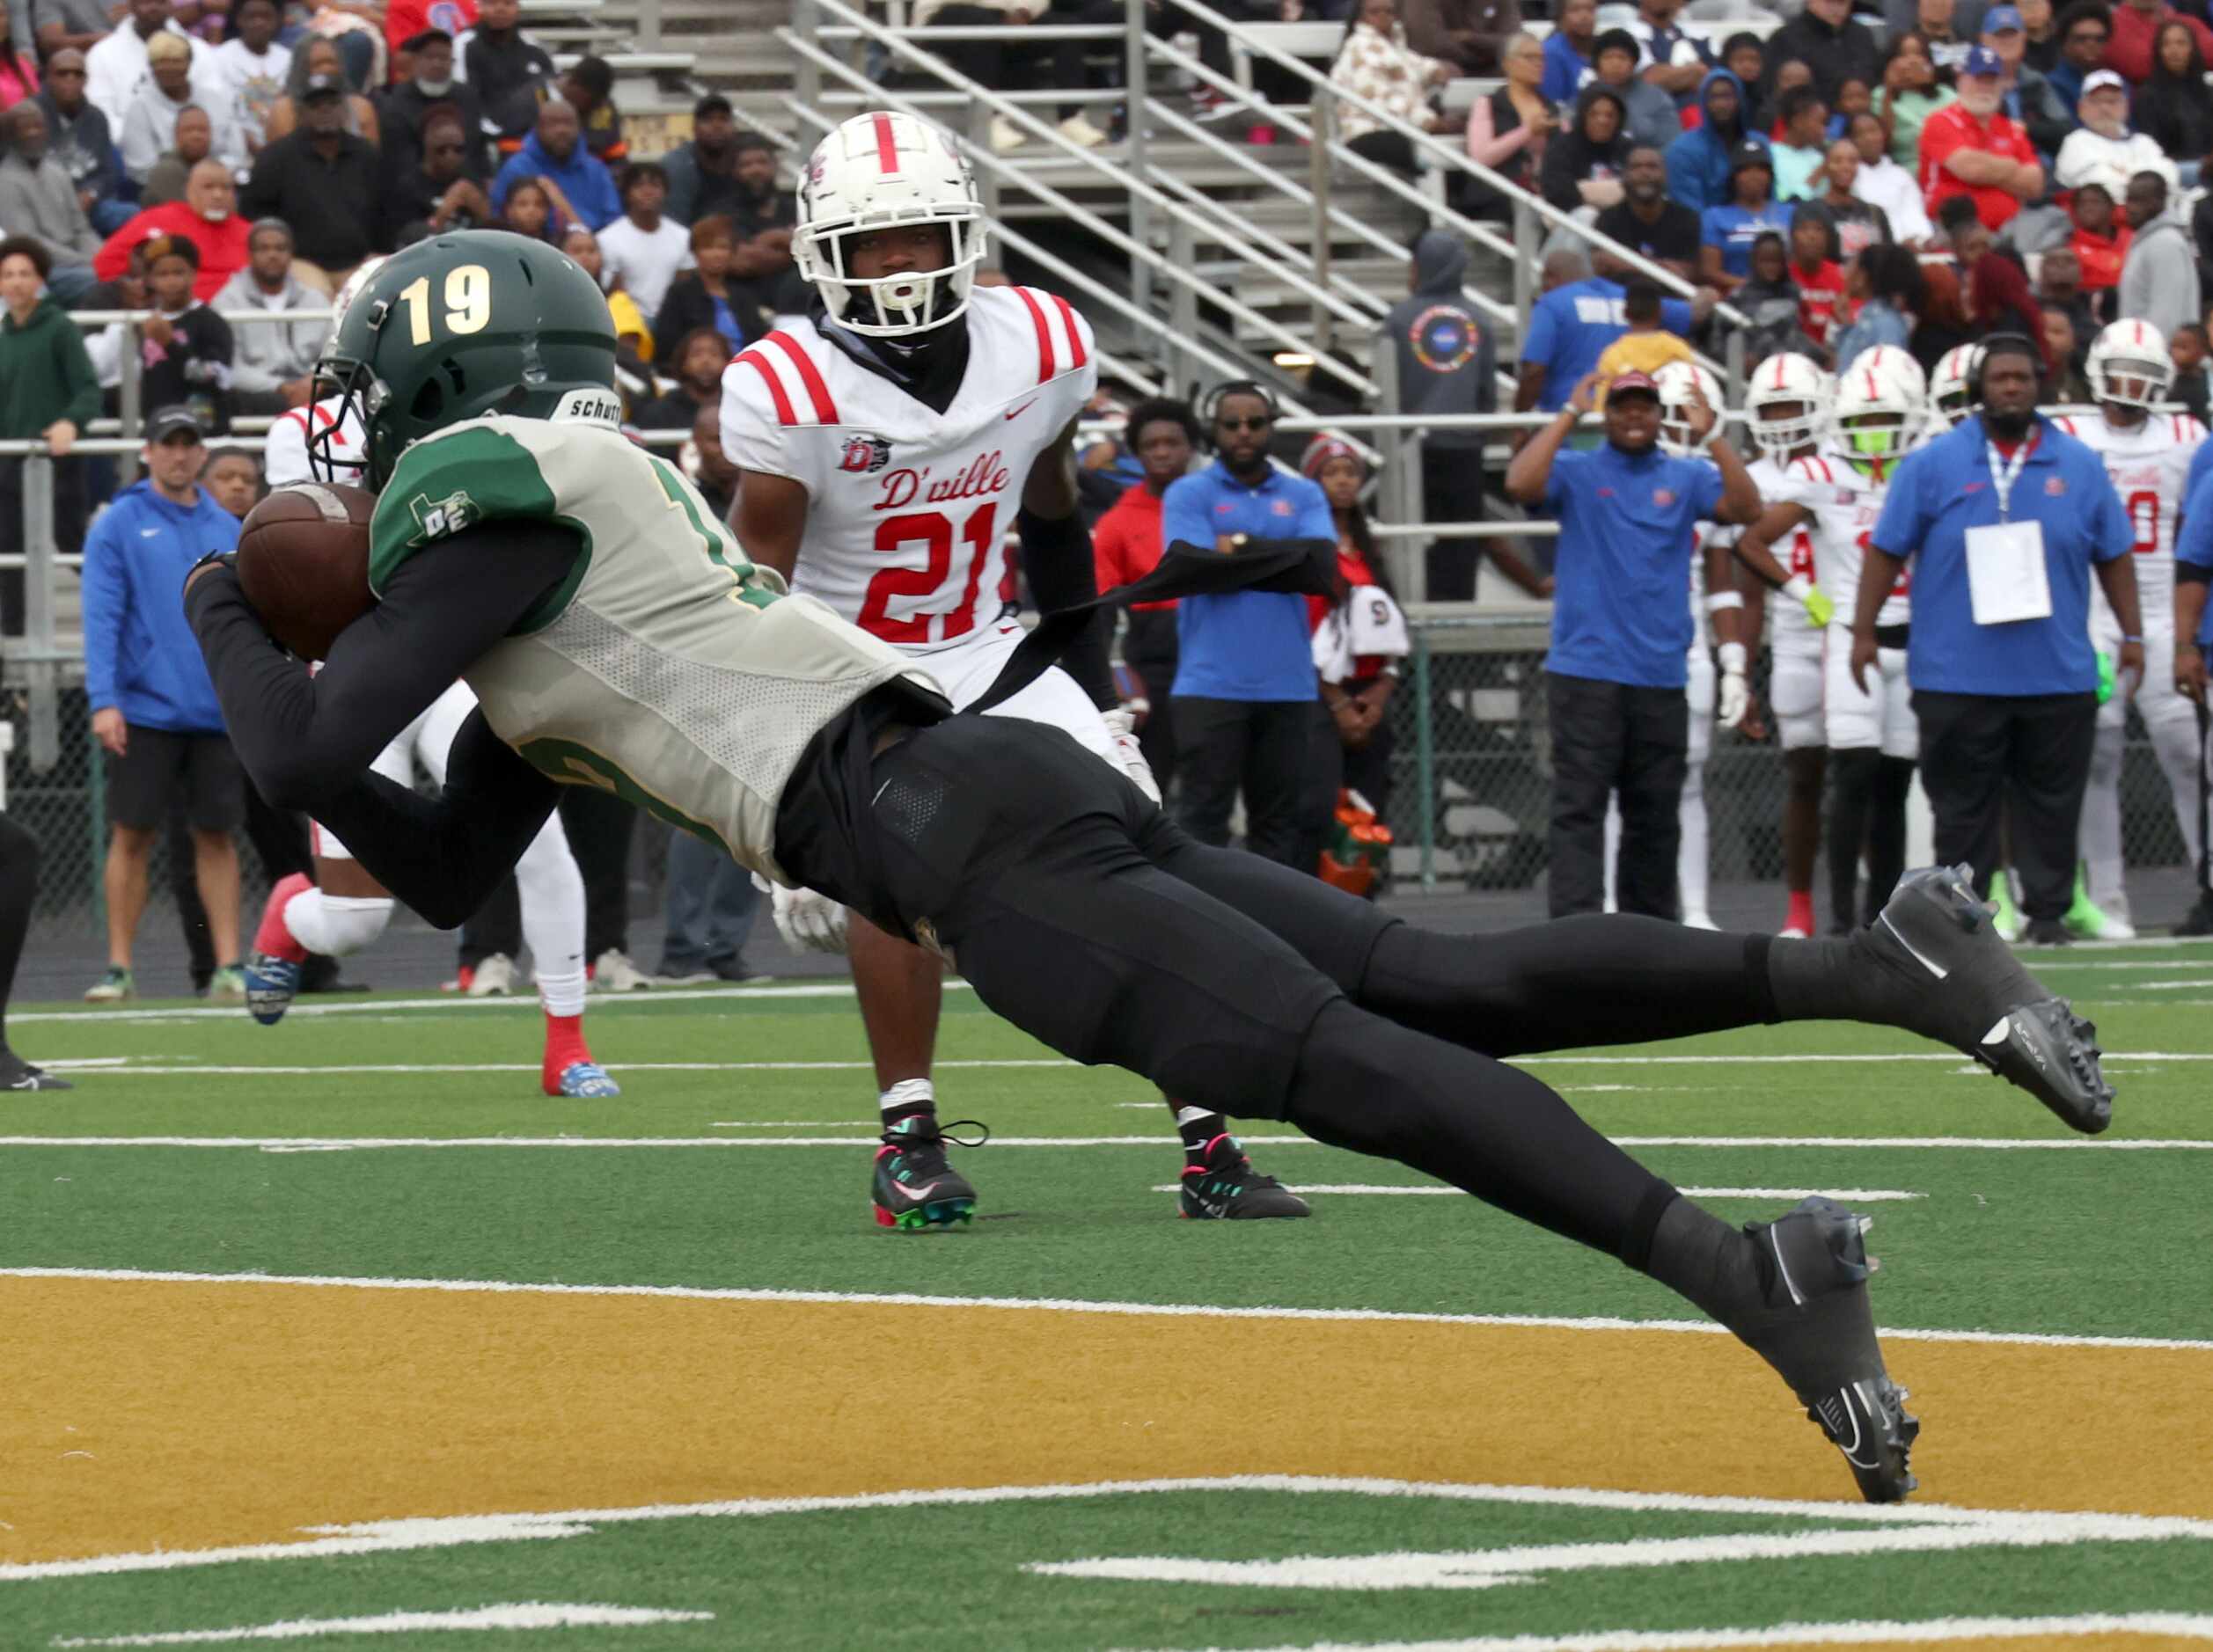 DeSoto receiver Kristoff Fantroy (19) lunges to pull in a touchdown pass in the end zone as...